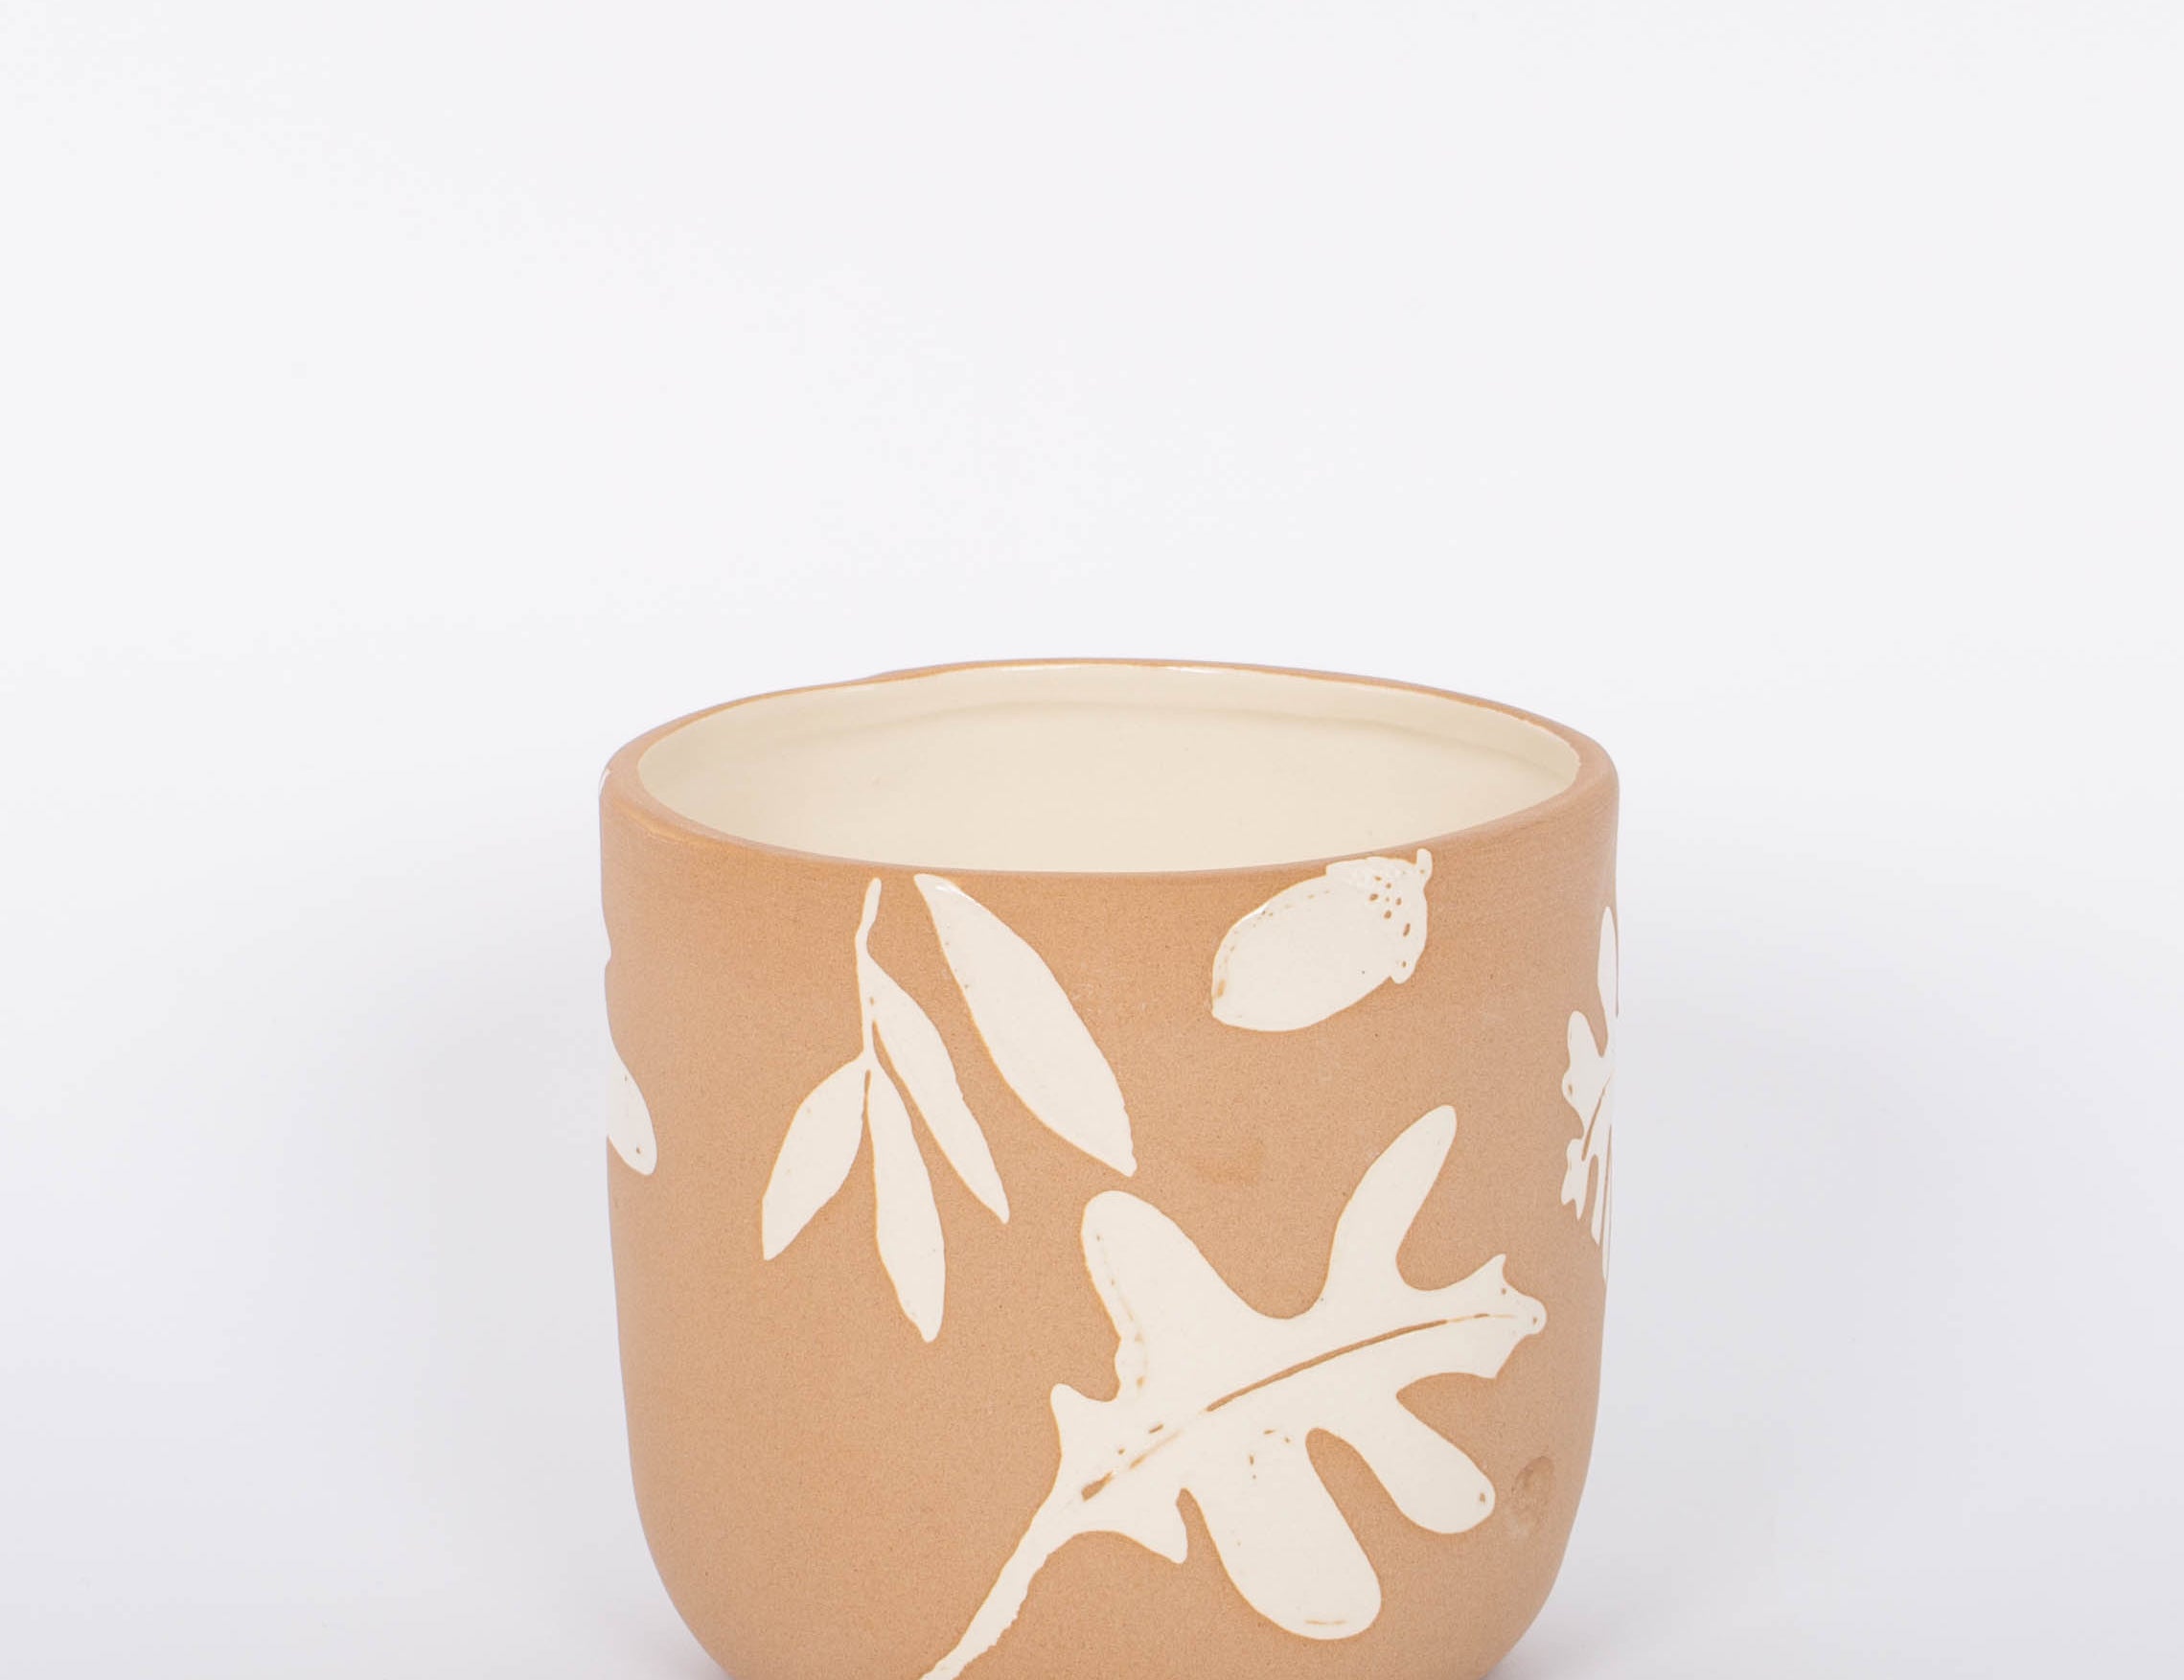 Rustling Pot with oak leaves and acorns pattern in white glazed ceramic and natural bisque. White background.